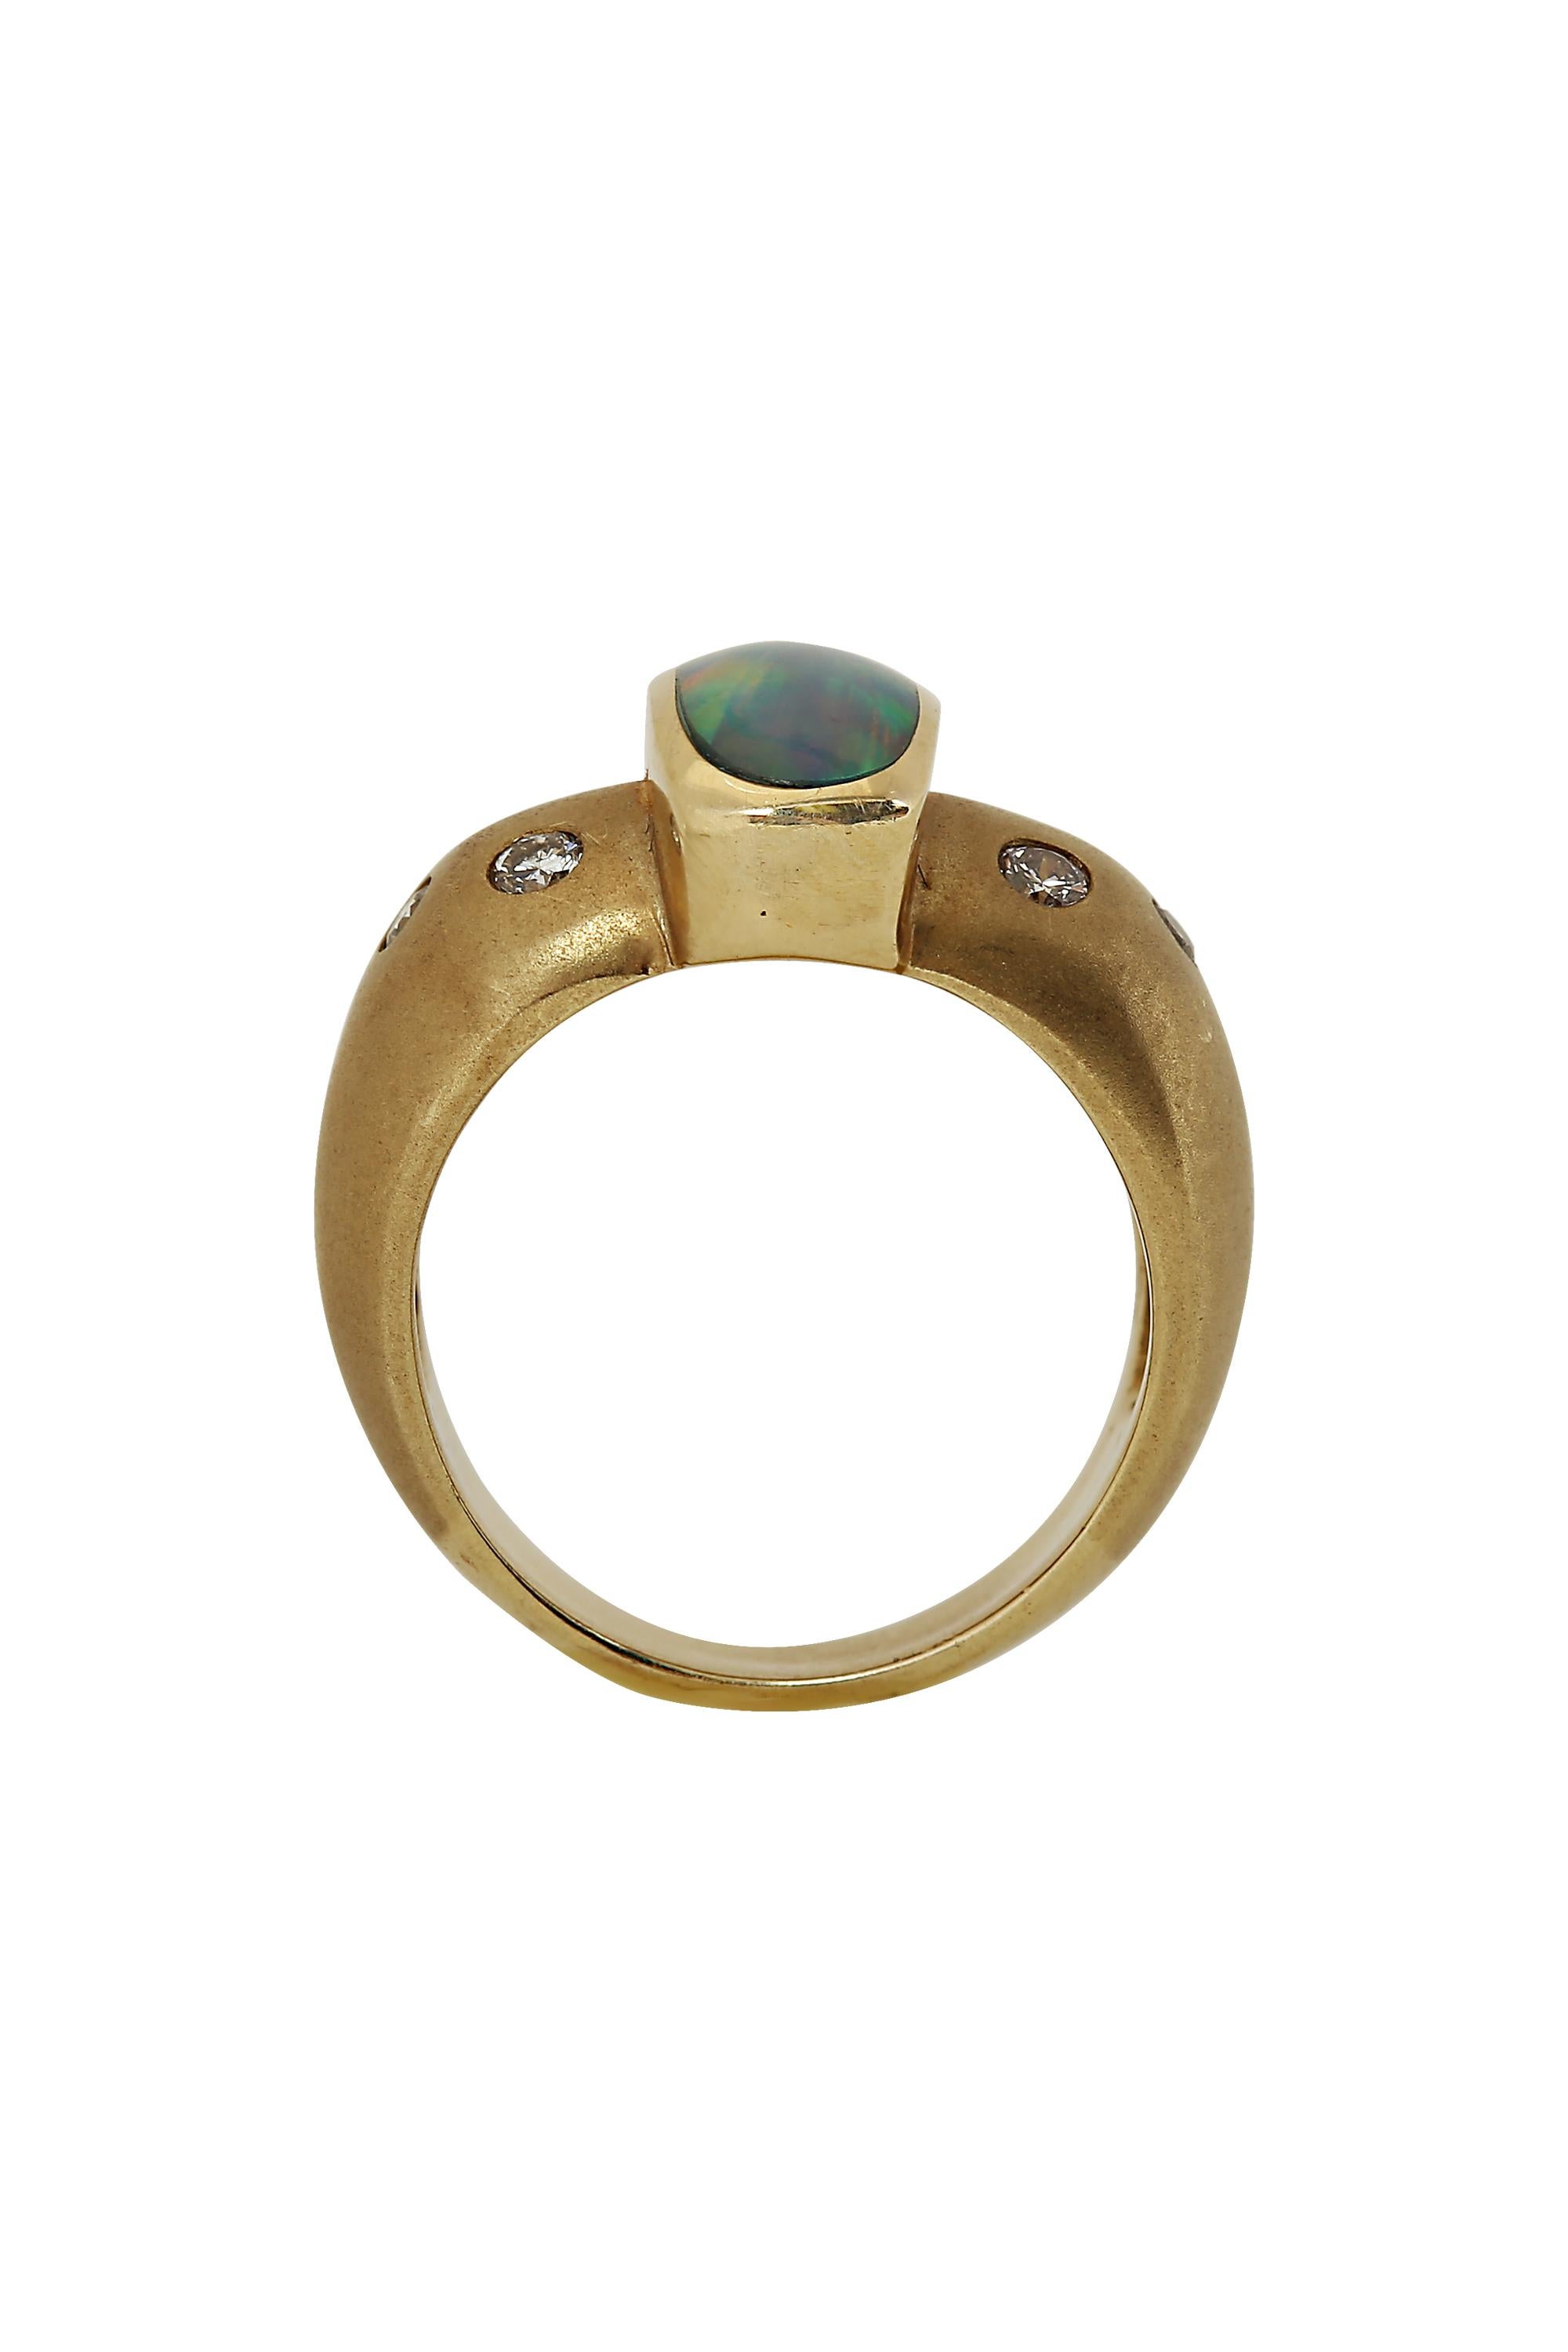 This striking and modern ring features and elongated opal with a vibrant interplay of glowing colors set in a polished and matte finished 14 karat yellow gold mounting studded with flush set diamonds. Total diamond weight is approximately .20